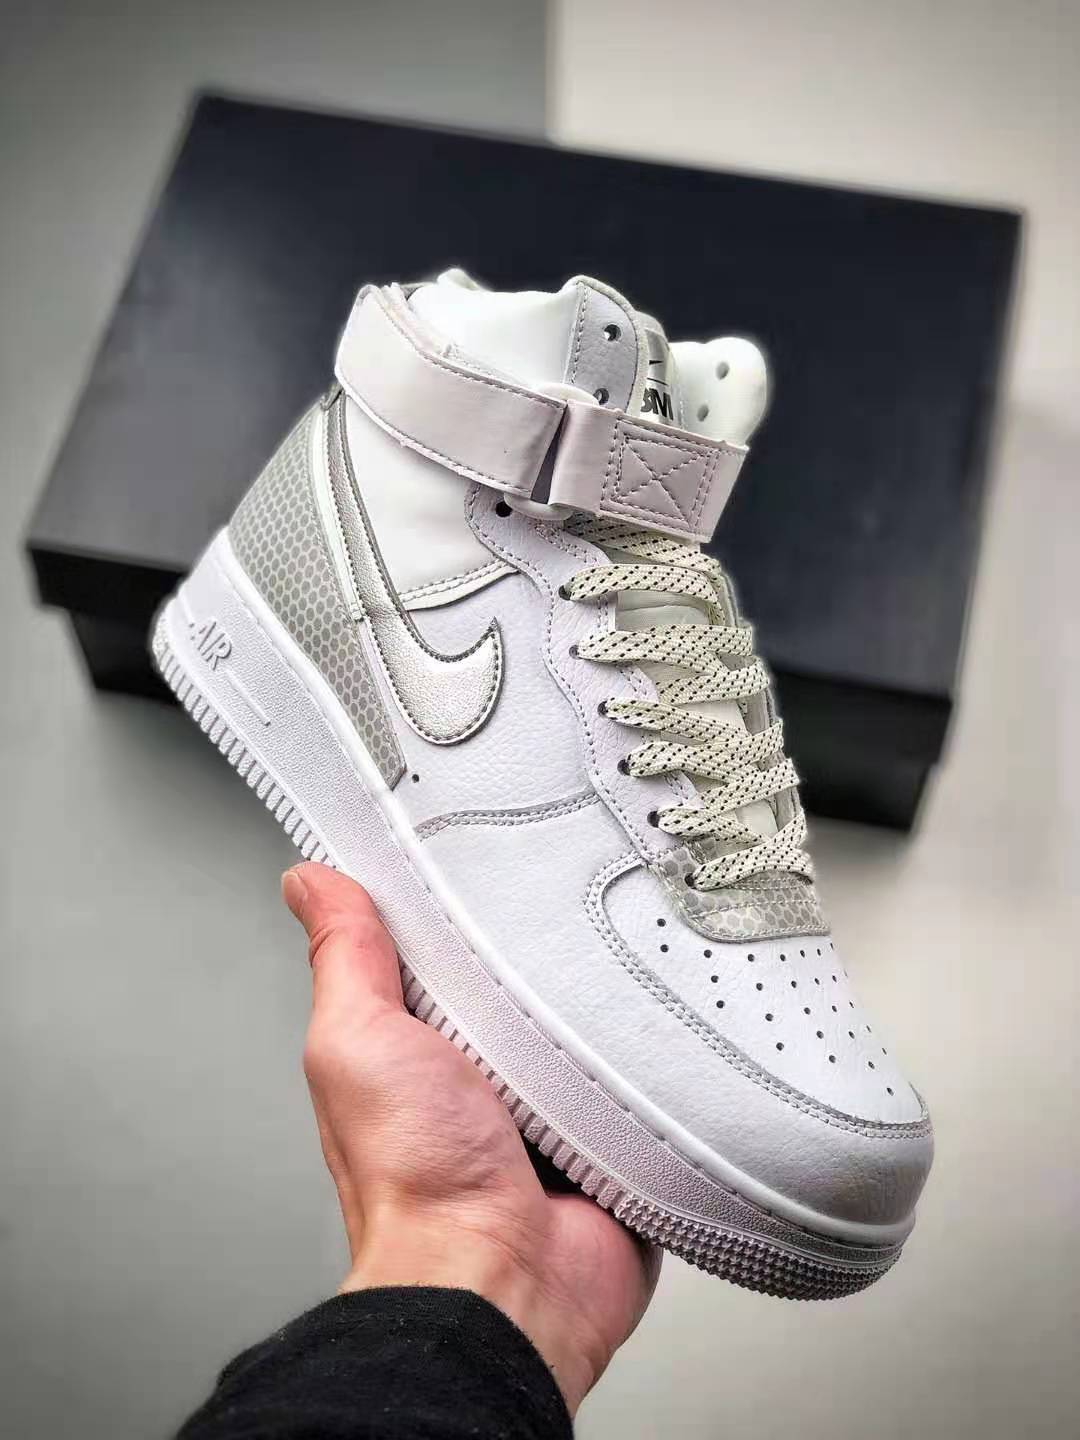 Nike 3M x Air Force 1 High 'Summit White' CU4159-100 - Buy Now!